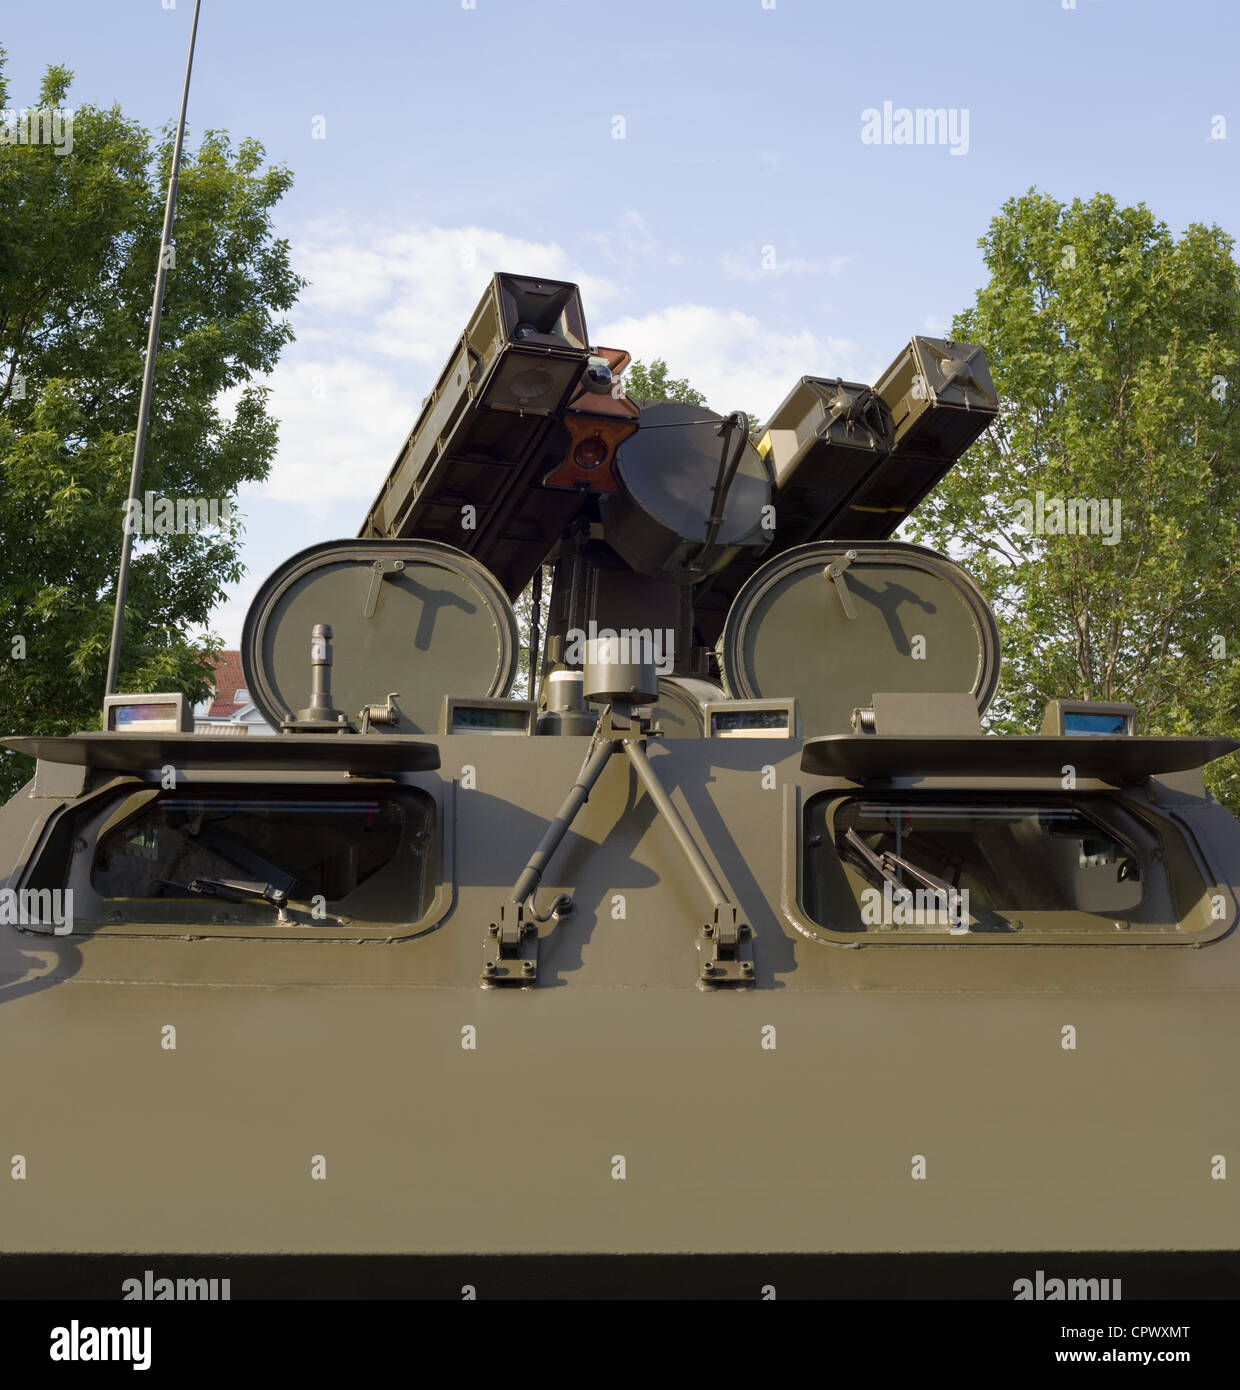 Four Anti Air Missile Turret Launcher on Armored Vehicle Stock Photo